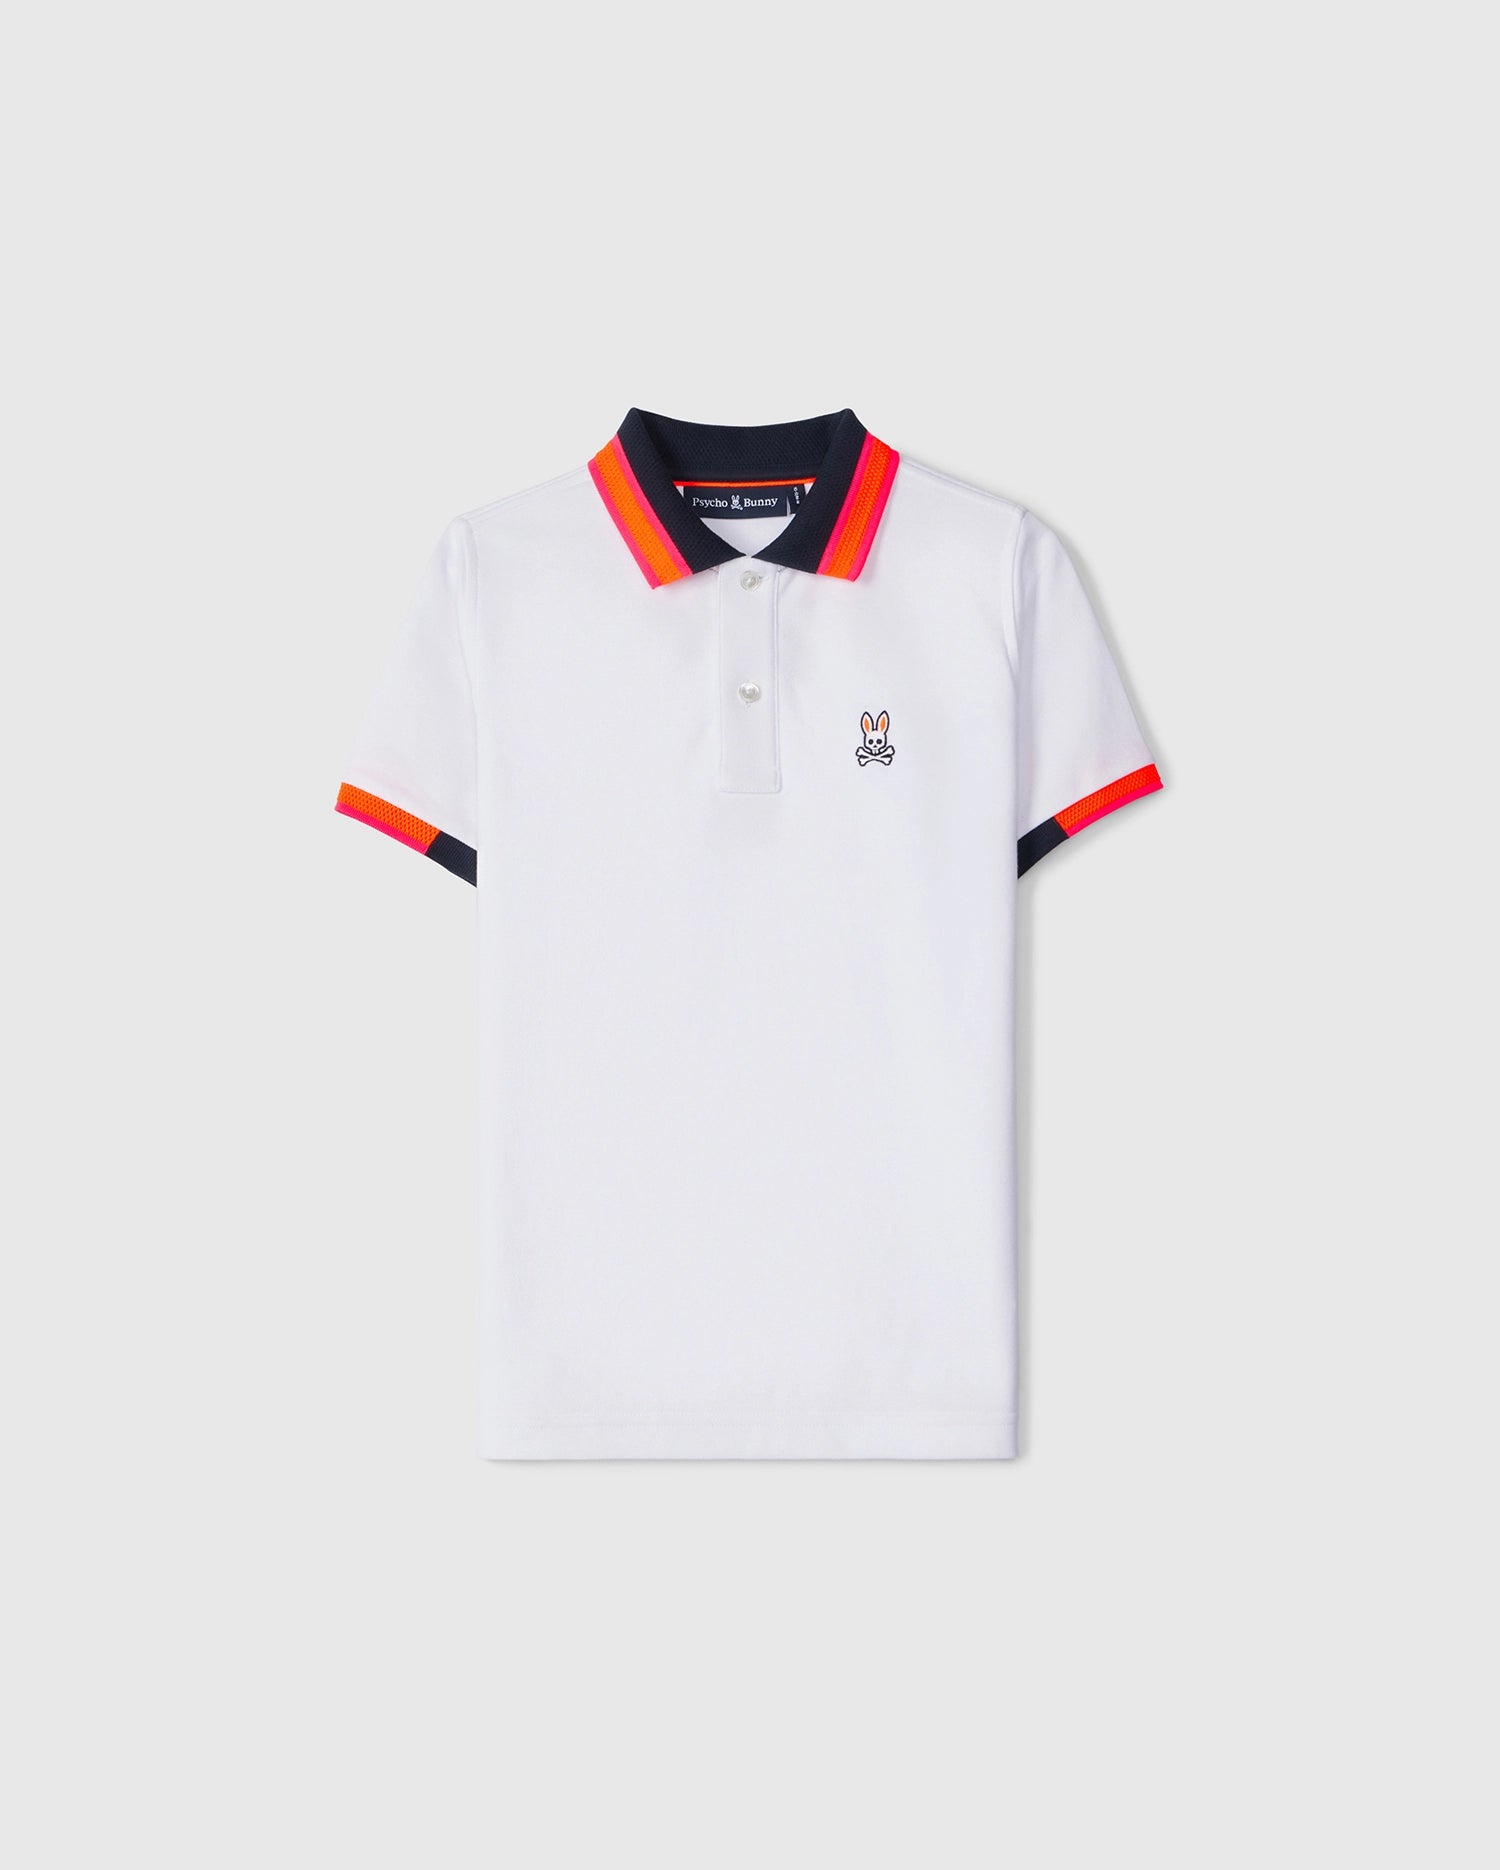 A classic and bold white KIDS WOODSTOCK PIQUE POLO SHIRT - B0K141B200 from Psycho Bunny featuring contrasting black and red-orange stripes on the textured-knit collar and sleeve ends. The shirt showcases a small embroidered rabbit logo on the left chest and has a button-up placket at the neckline.